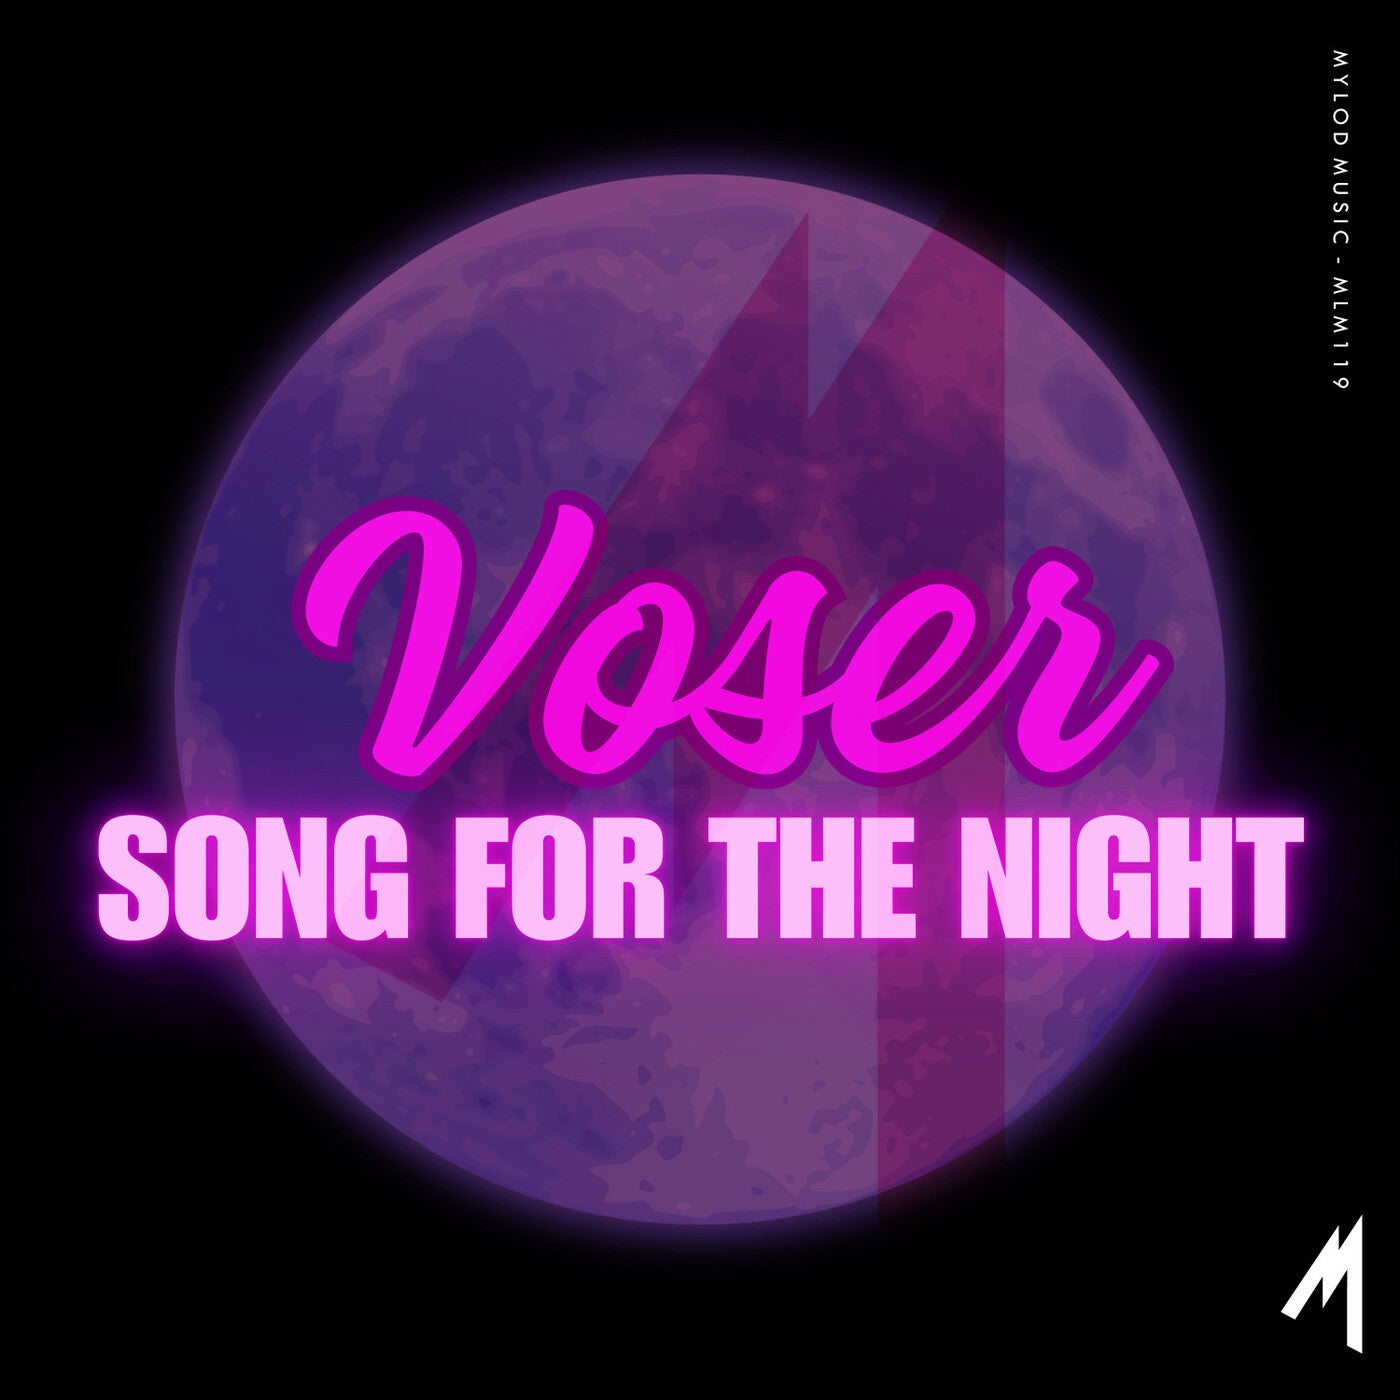 Voser - Song For The Night on Mylod Music